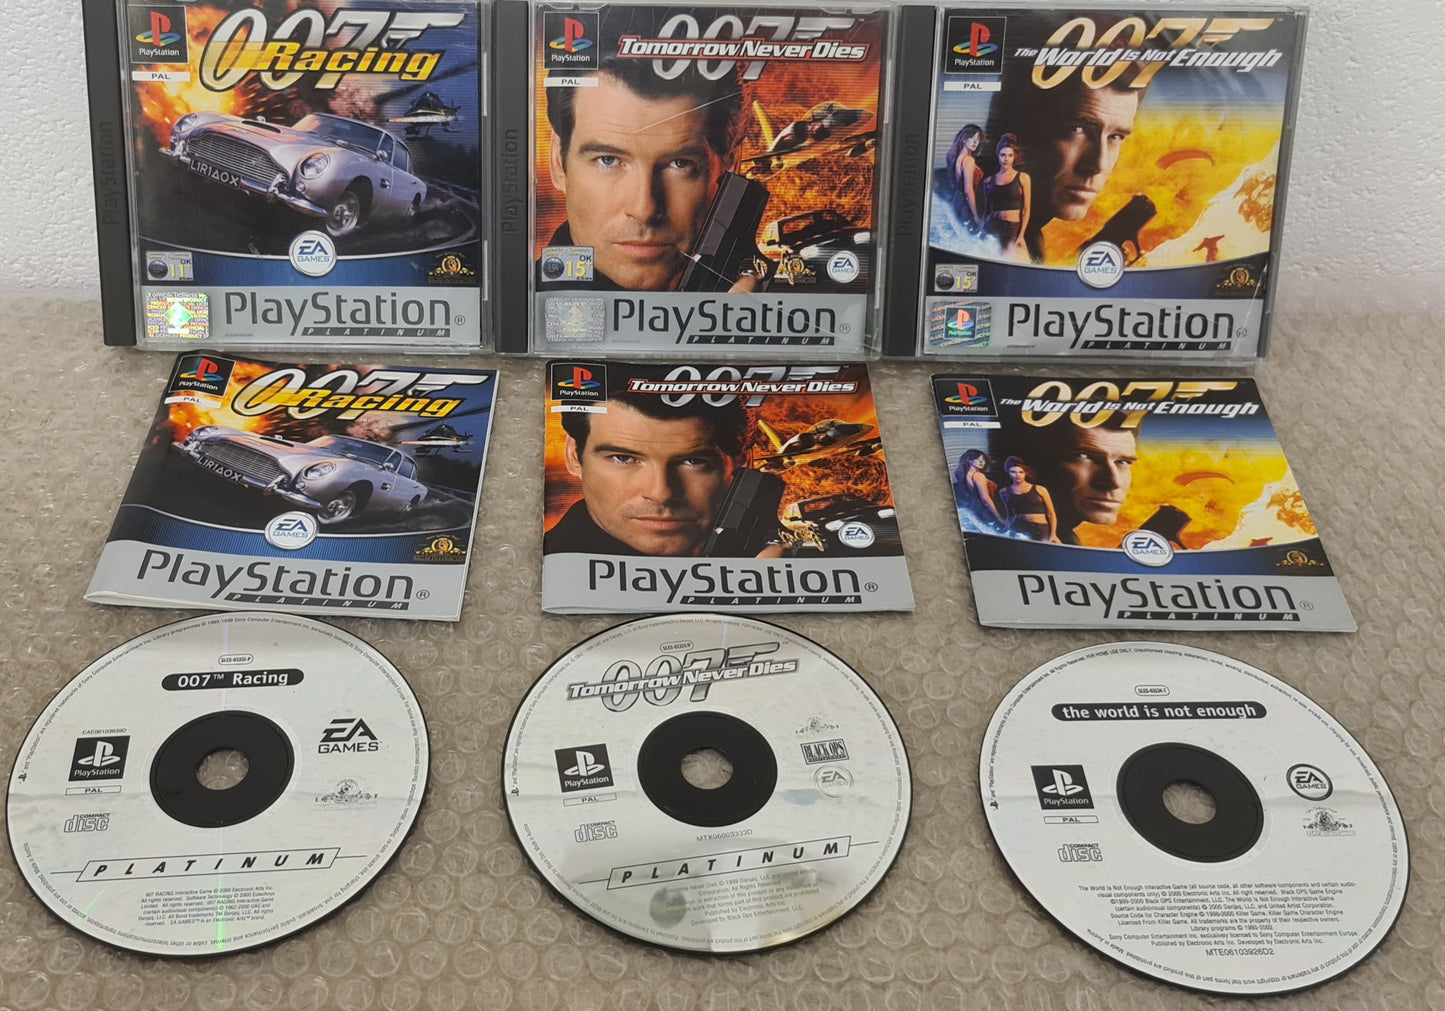 007 Racing, Tomorrow Never Dies & The World is not Enough Platinum Sony Playstation 1 (PS1) Game Bundle